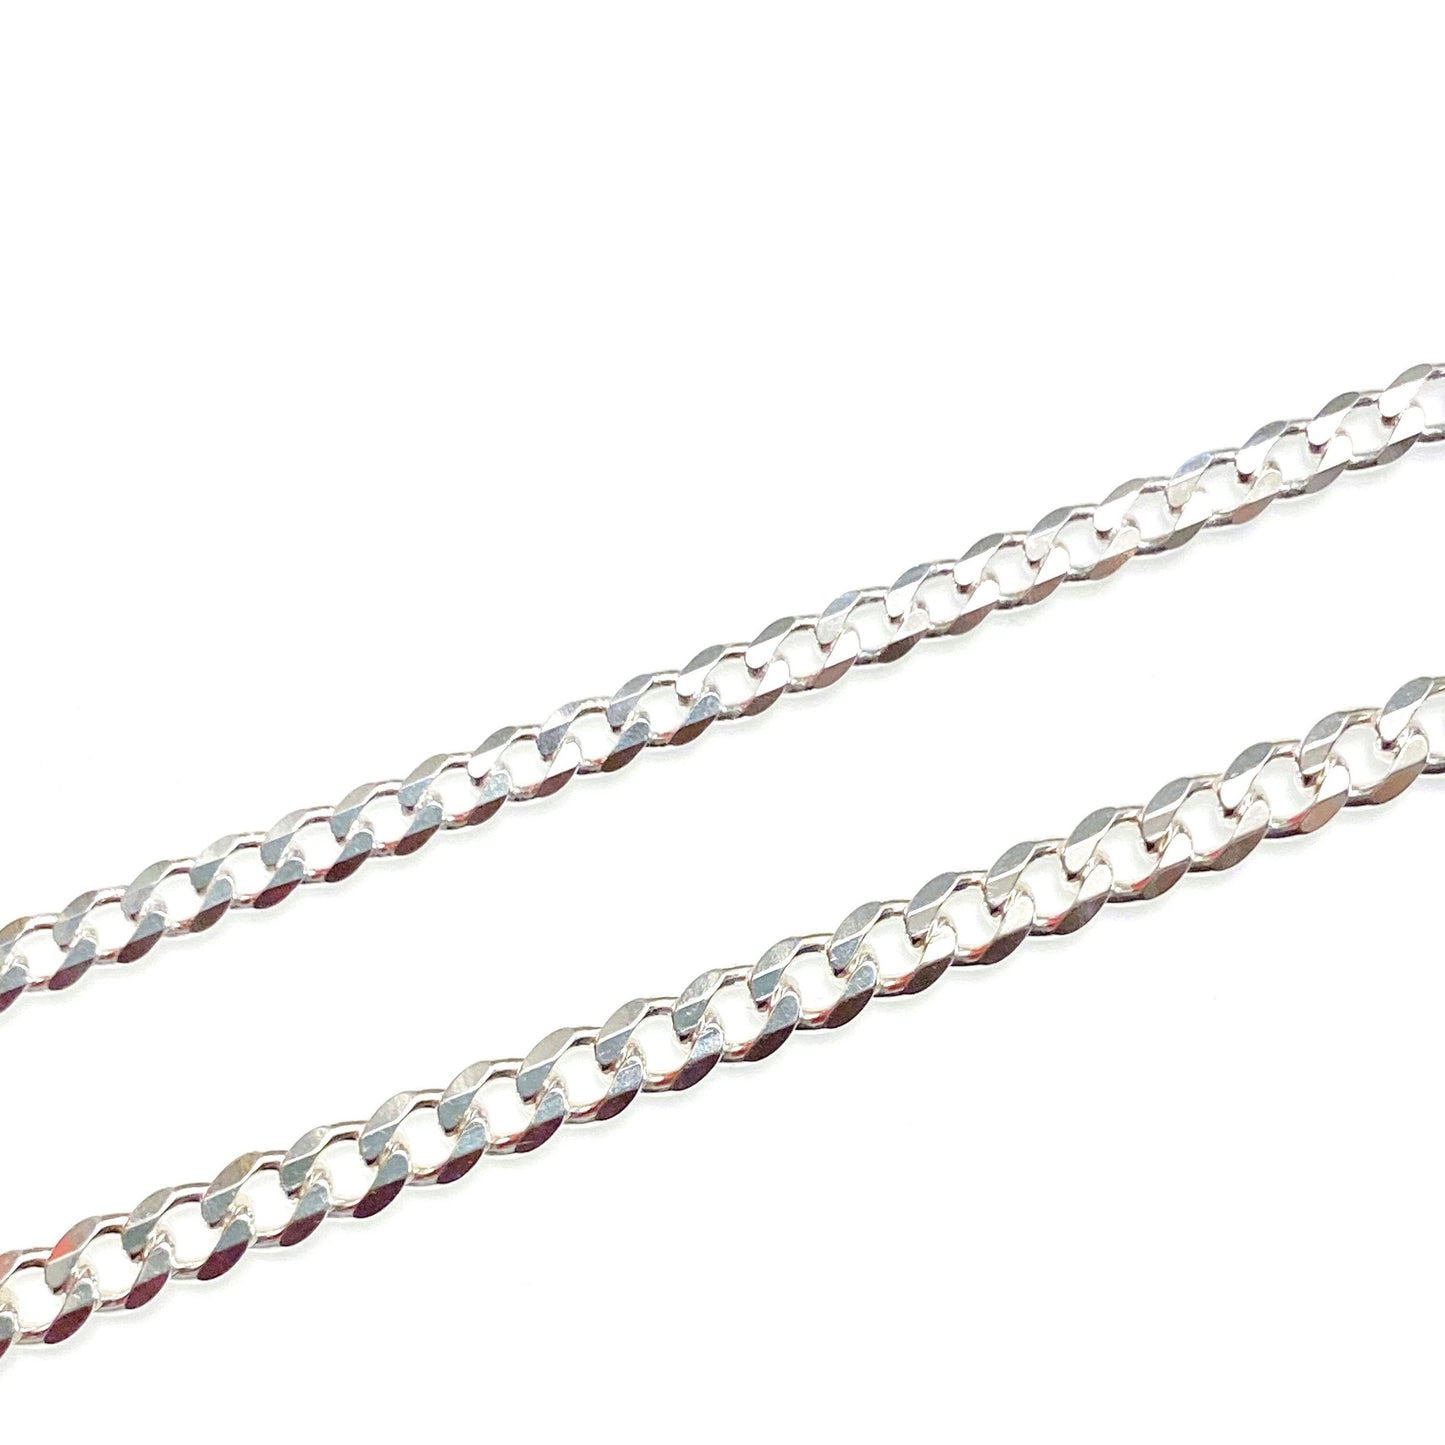 Italian curb chain bracelets (7 and 7.5 inches)